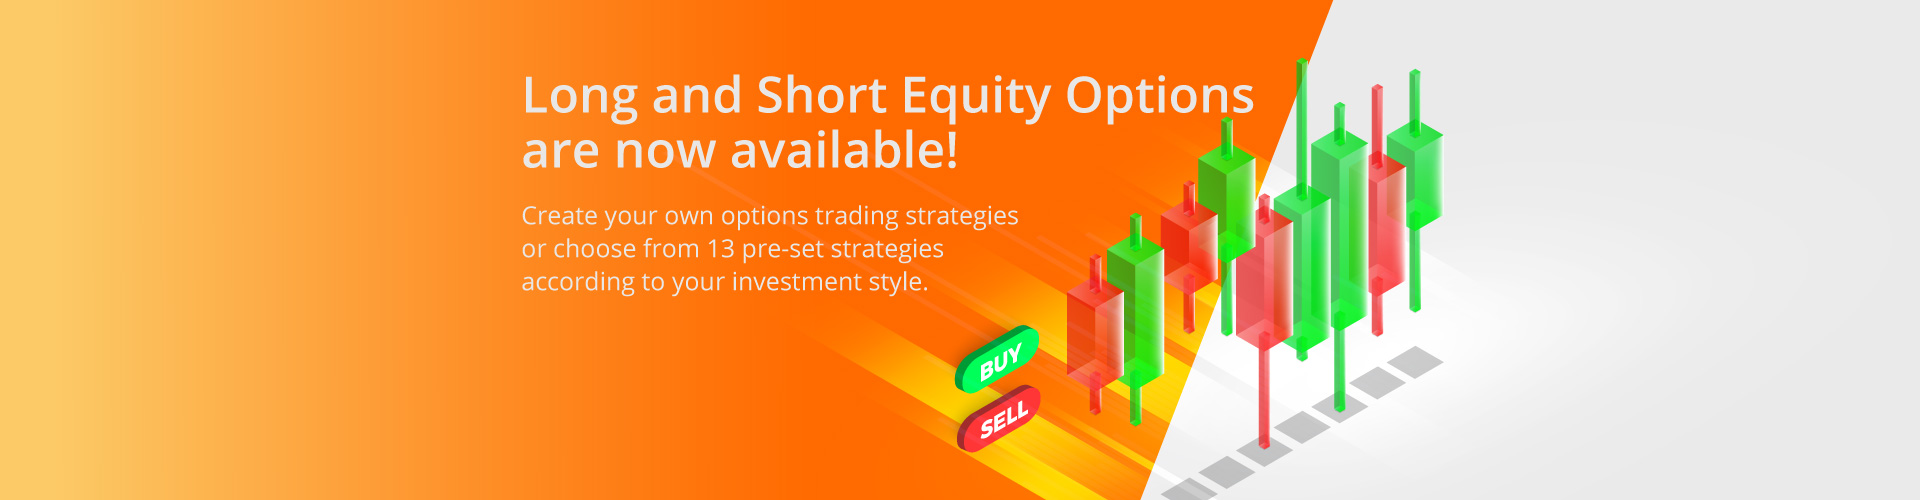 Long and Short Equity Options are now available!